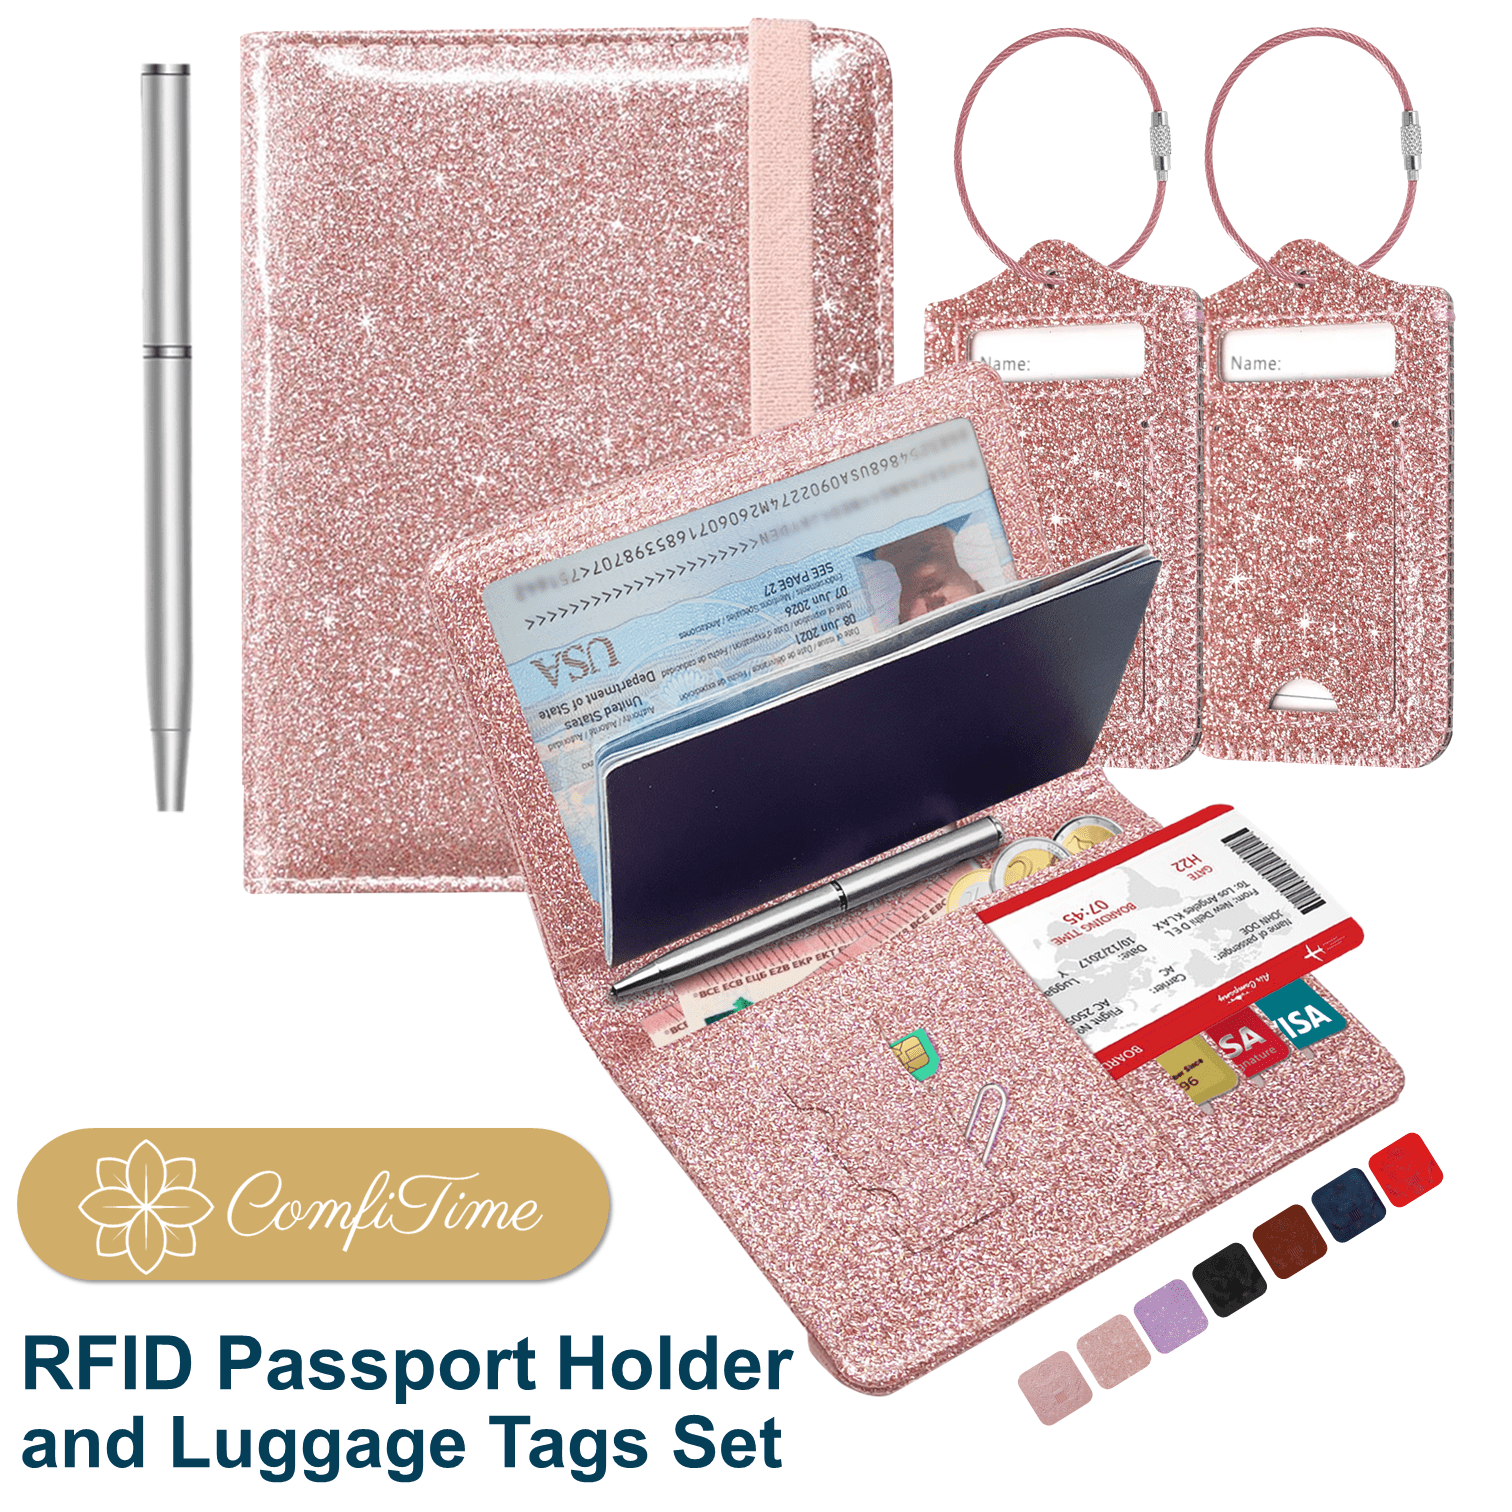 ComfiTime Passport Holder and Luggage Tags Set – RFID Passport Wallet/Cover  with Vaccine Card Holder and Credit Card Slots, PU Leather Travel Tags for 